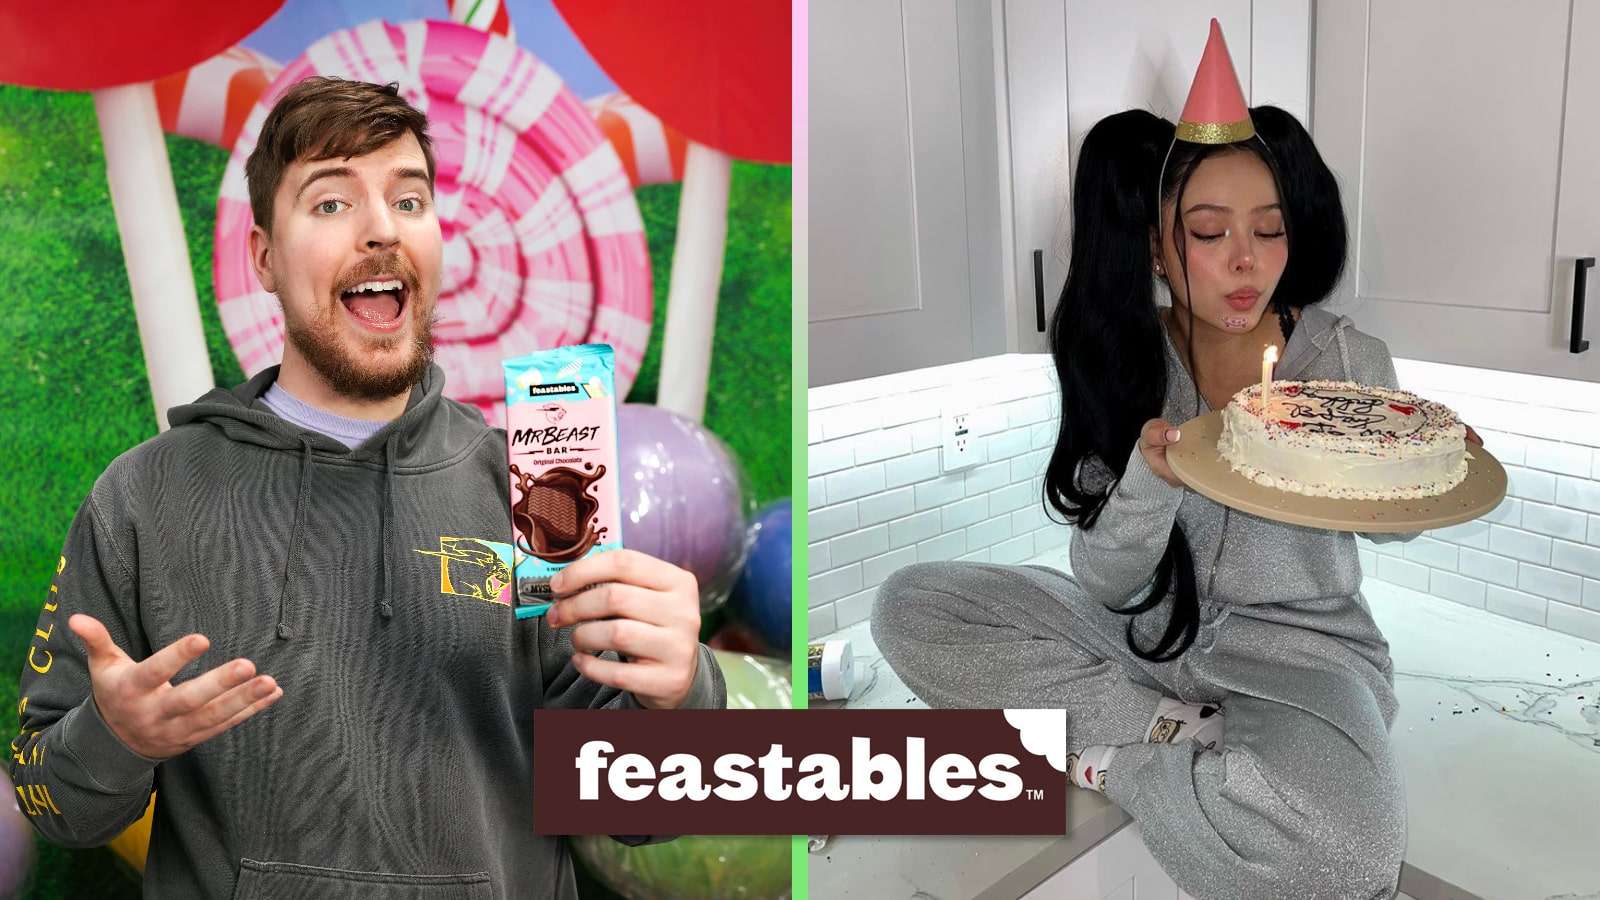 MrBeast surprises Bella Poarch with new 'Feastables' bike for her birthday